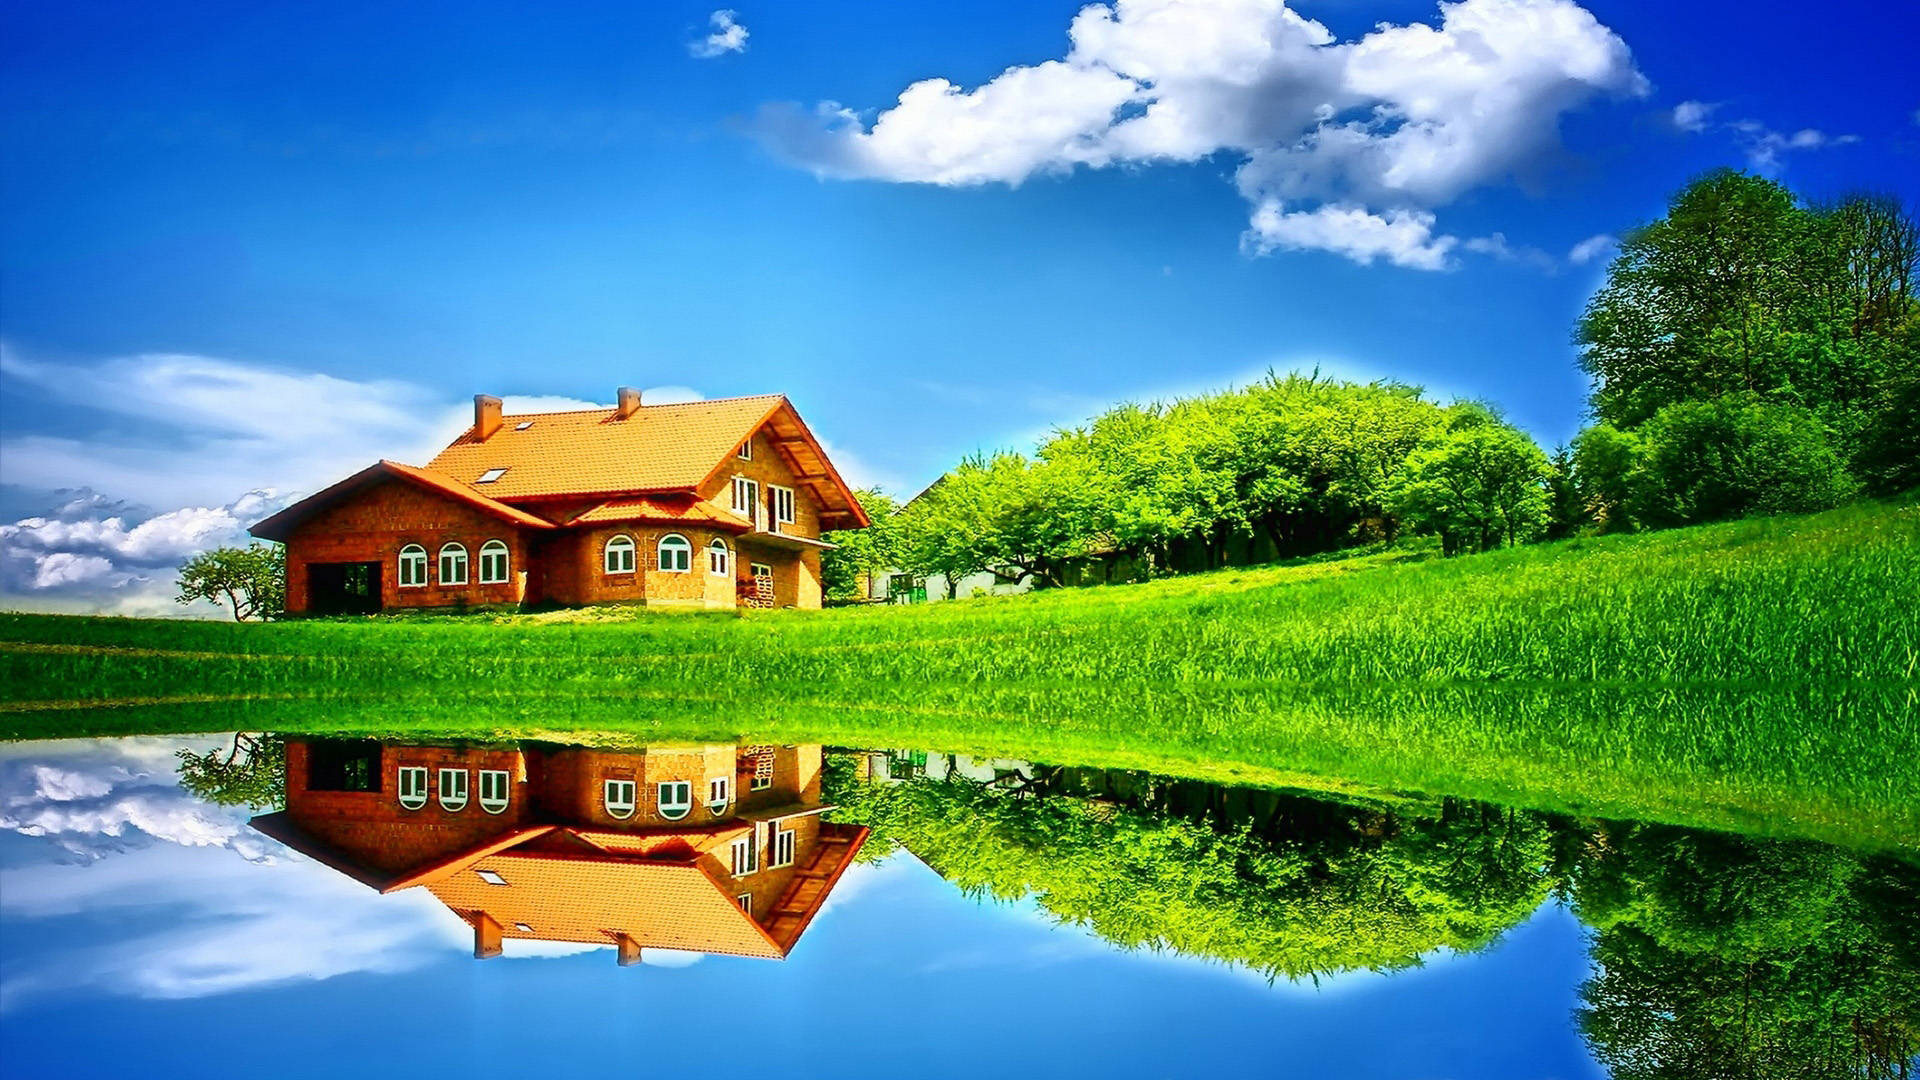 Download Yellow House And Greenery Best Hd Wallpaper 